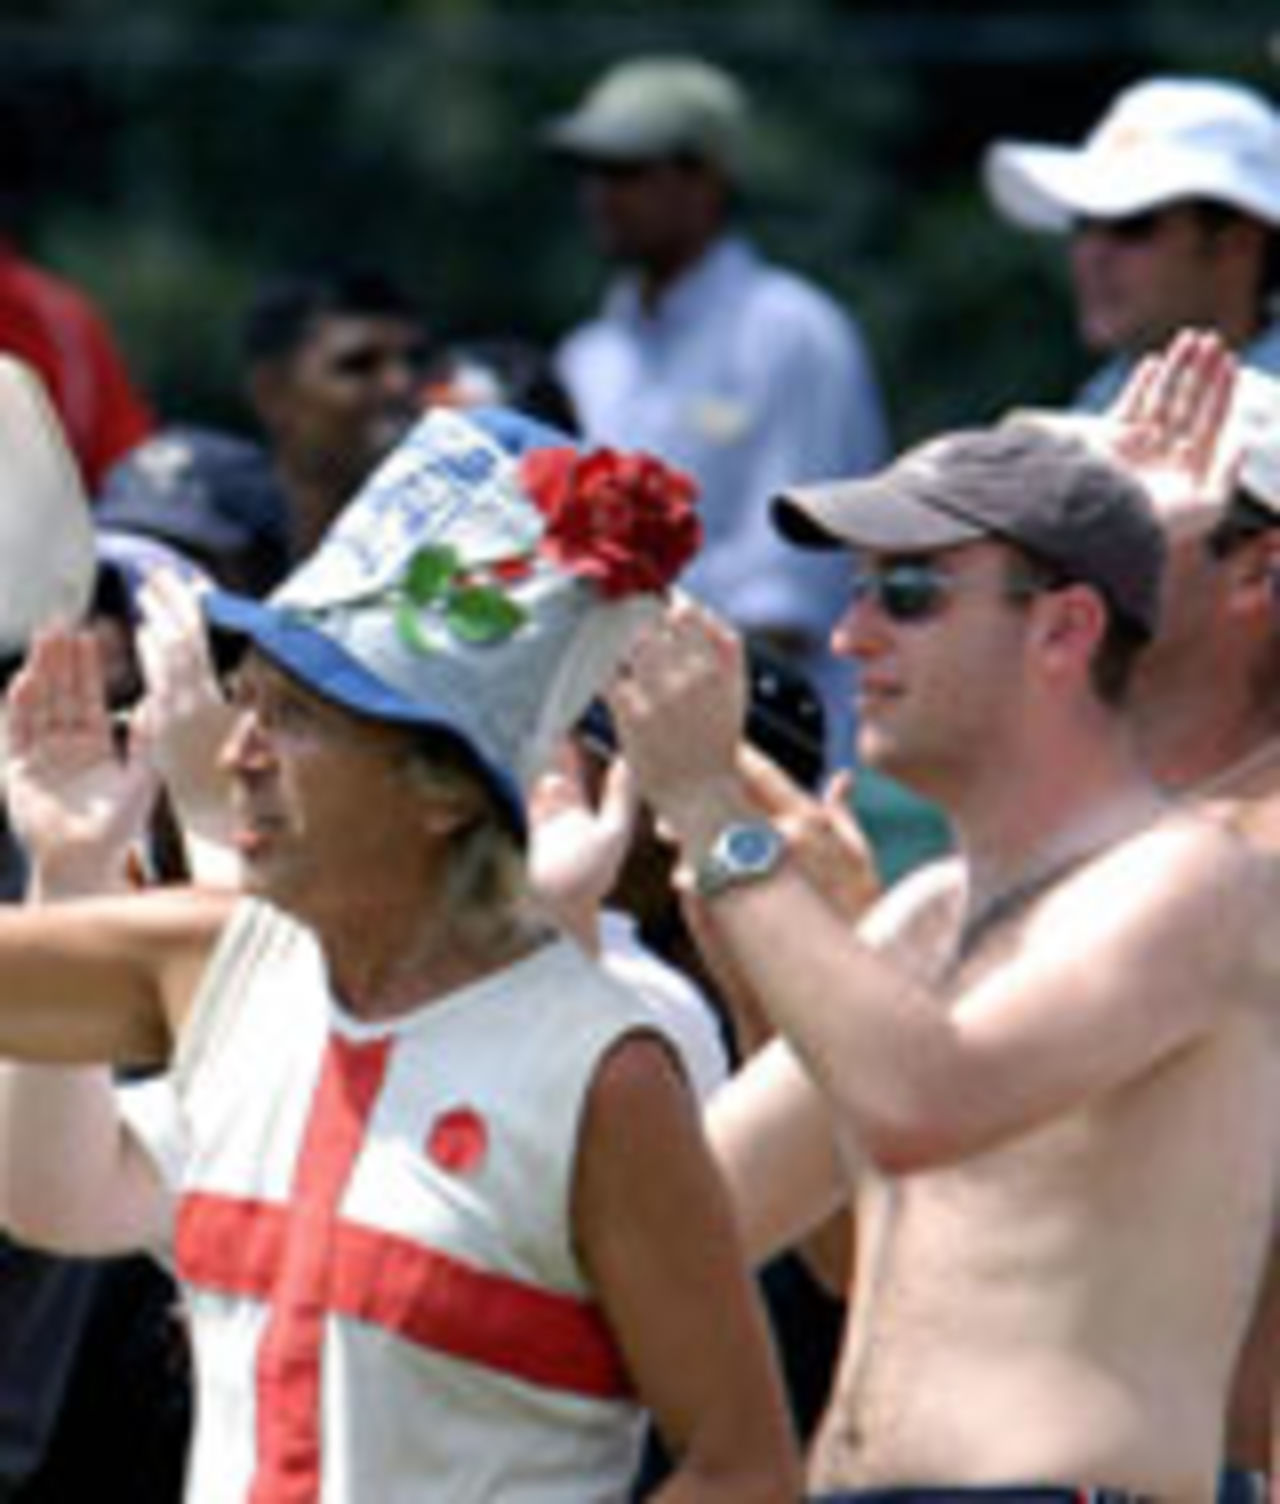 Members of the Barmy Army, Galle, December 3, 2003